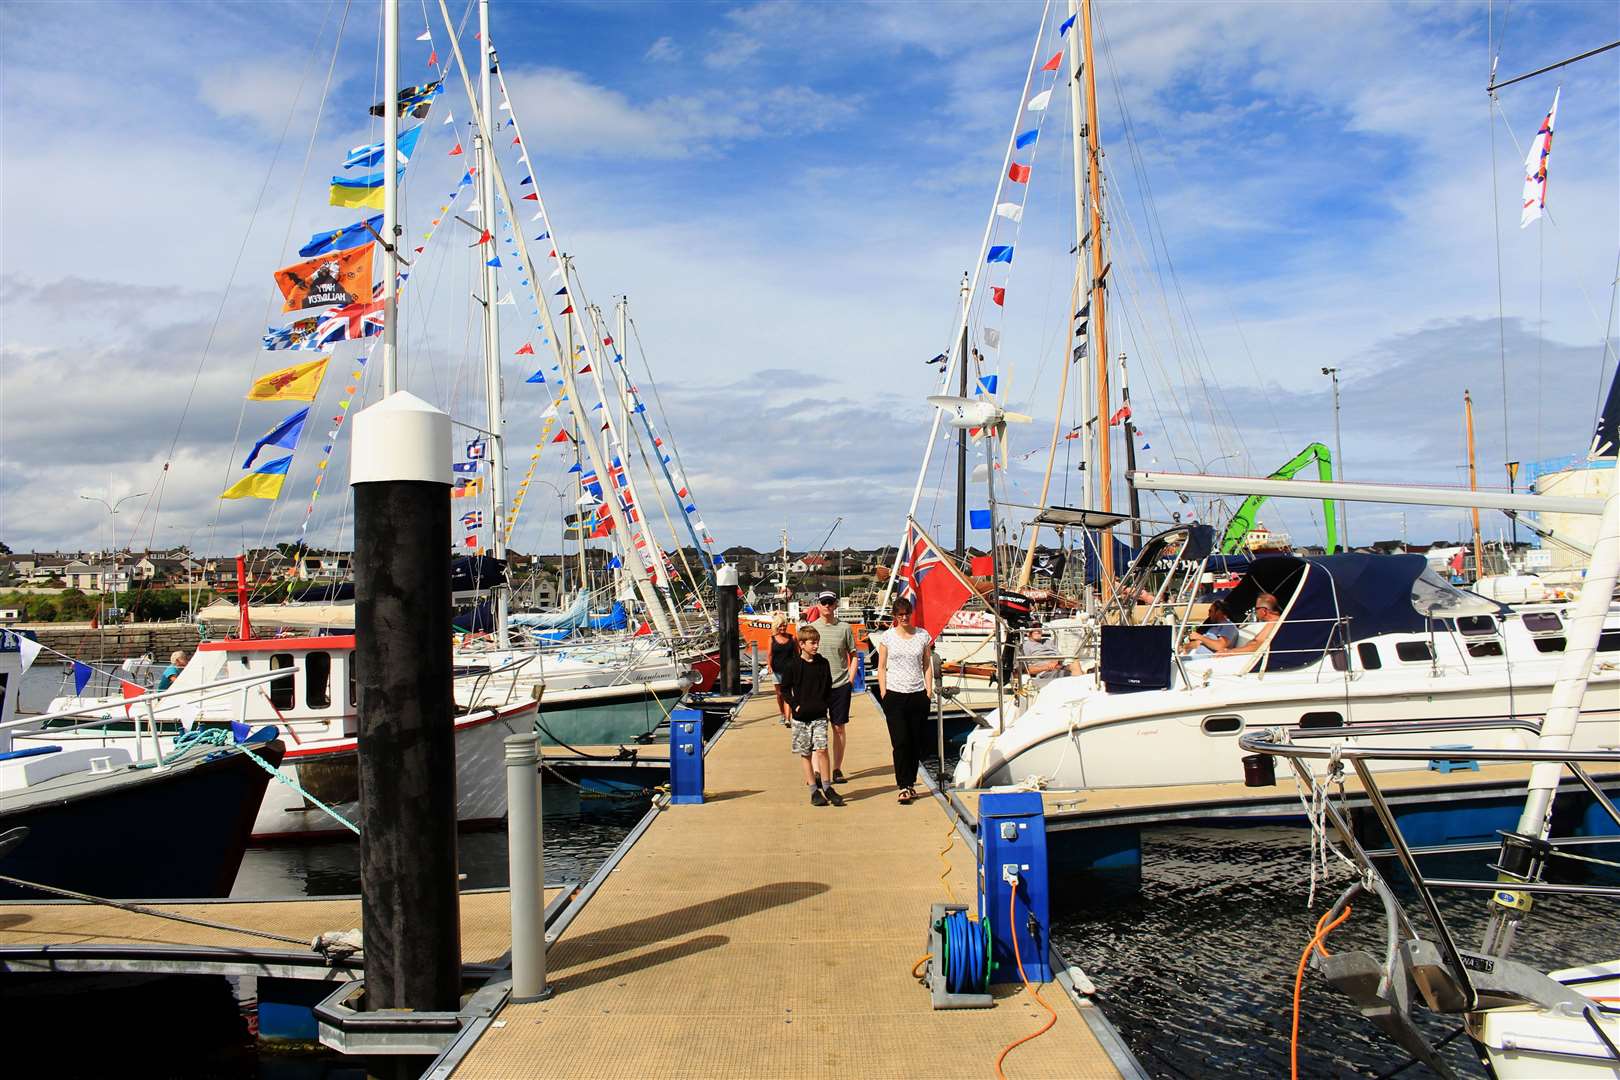 Harbour Day visitors had access to the pontoons in the marina. Picture: Alan Hendry